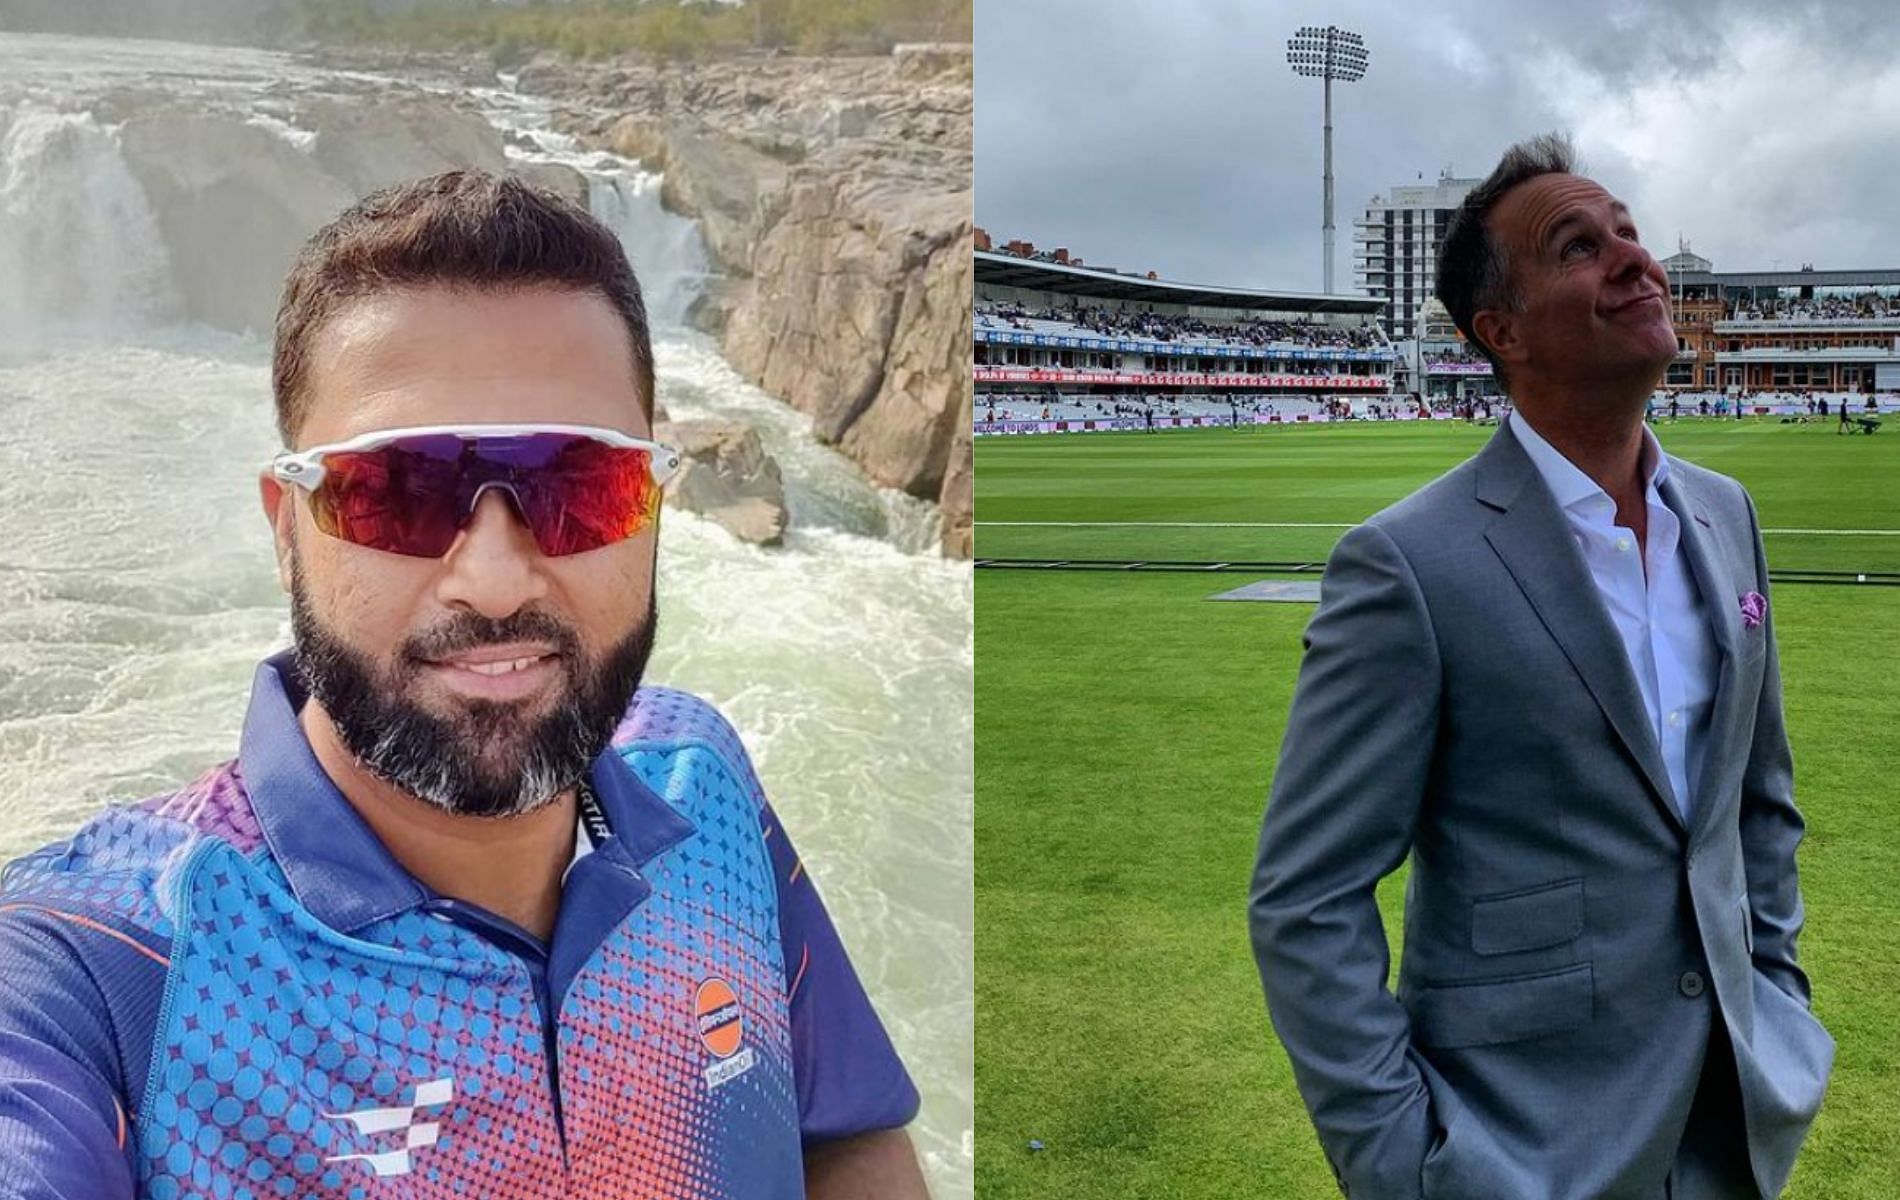 Wasim Jaffer and Michael Vaughan have kept fans entertained with their constant Twitter banter around the T20 World Cup.